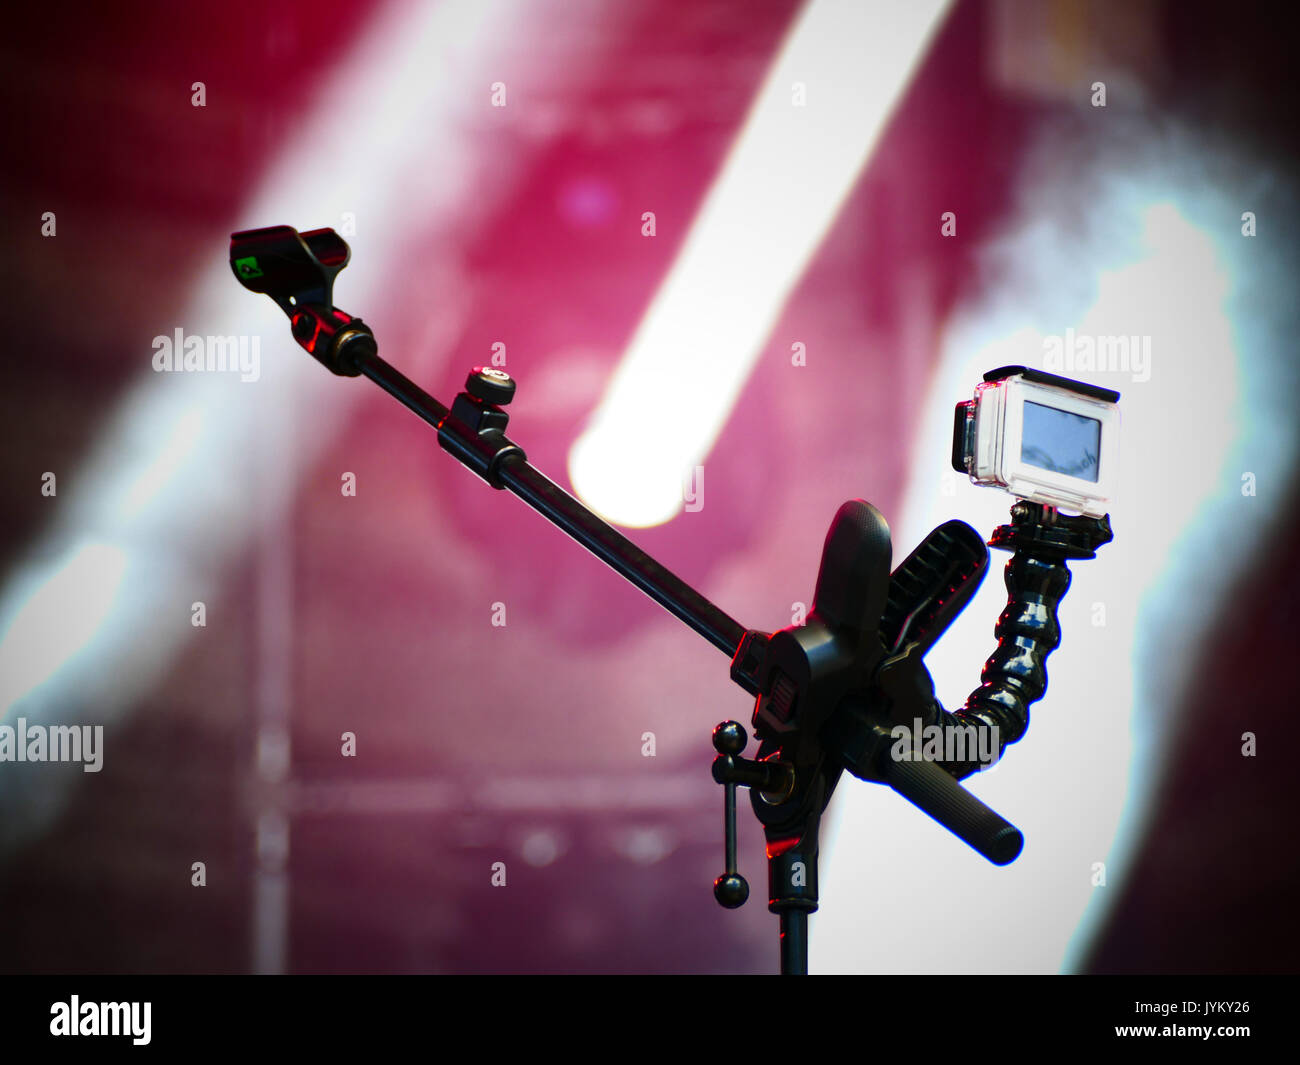 Sport camera on microphone stand filming concert Stock Photo